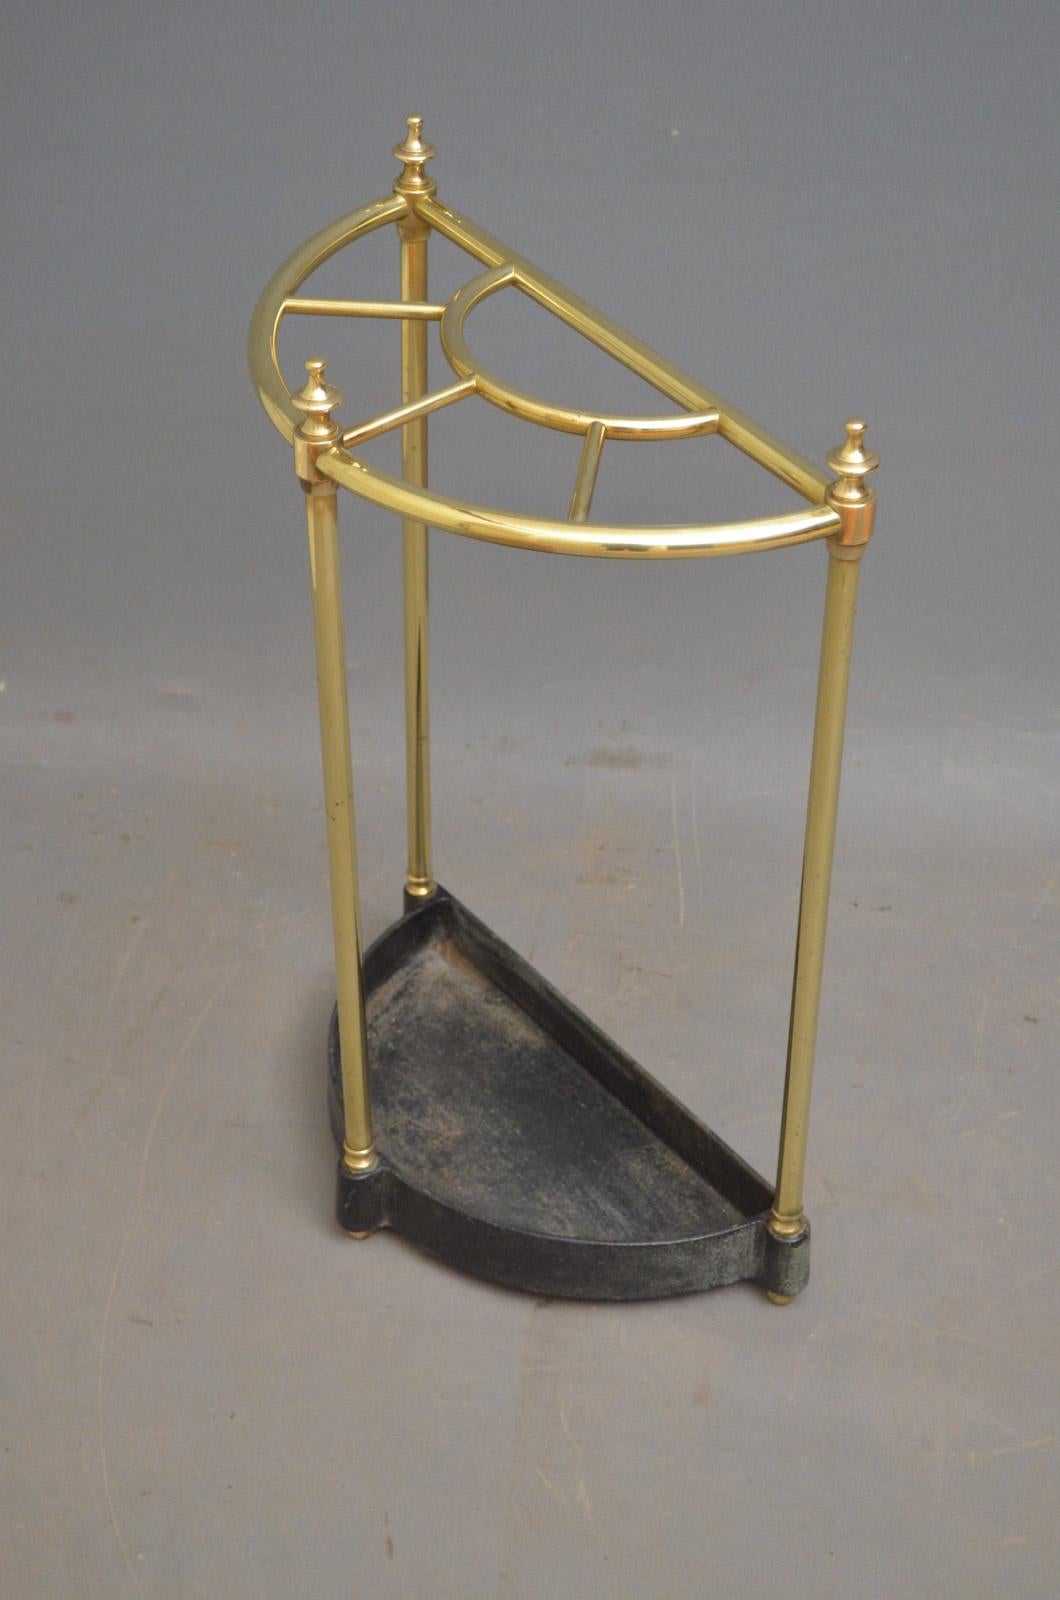 Sn4582, a Victorian brass demilune umbrella stand / stick stand, having 5 sections for umbrellas and walking sticks with finials and a drip tray, all in fantastic condition throughout, ready to place at home, circa 1880
Measures: H 24?, W 16?, D